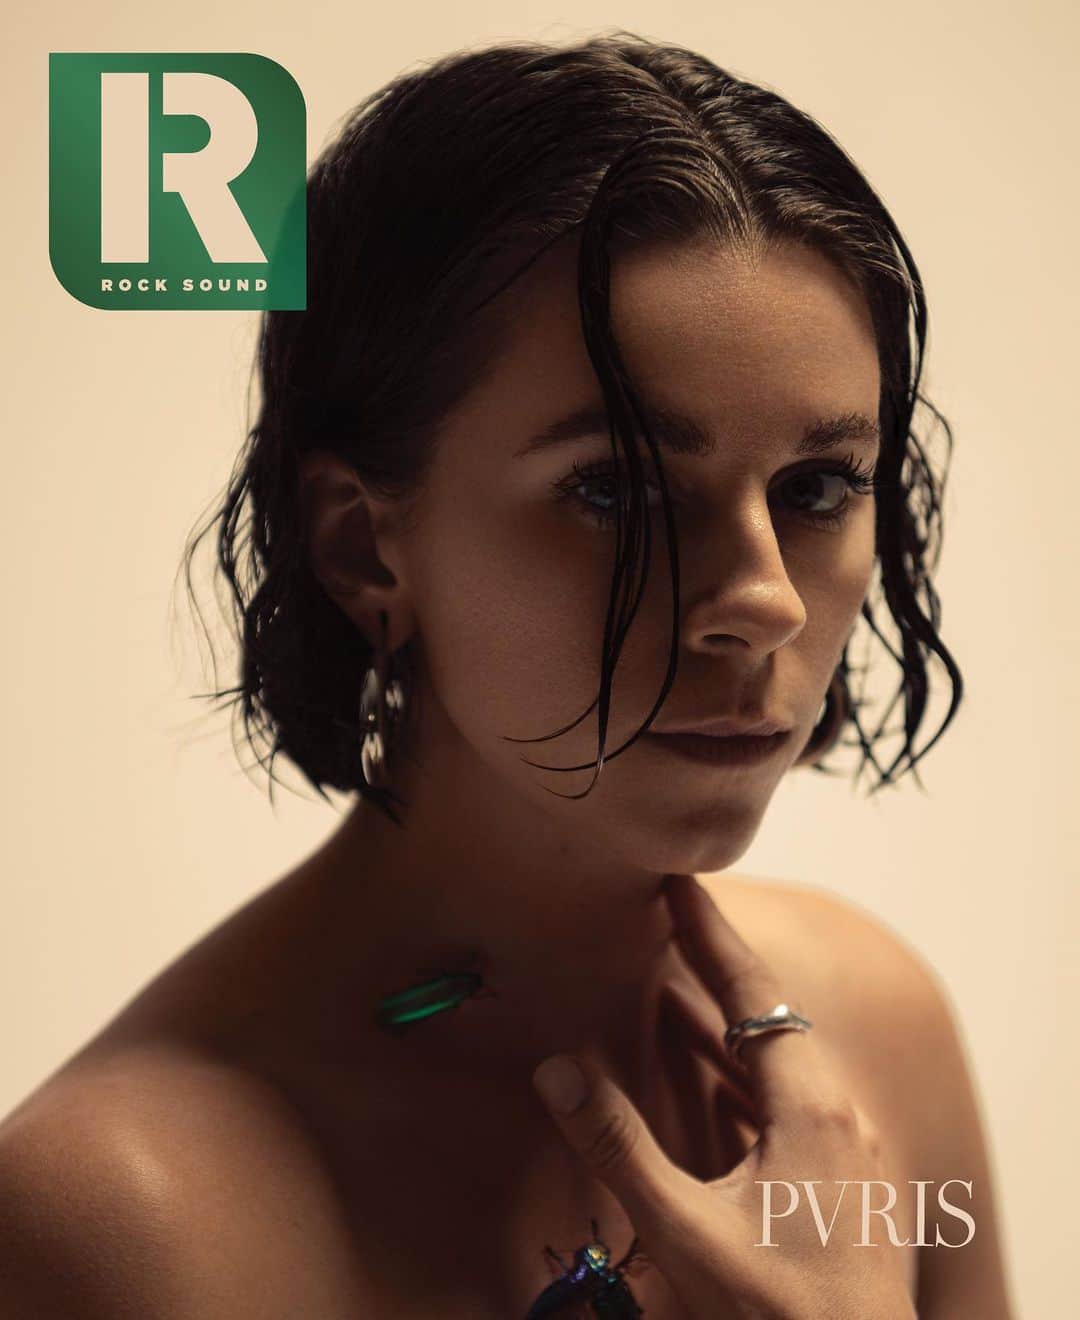 Rock Soundのインスタグラム：「PVRIS return to the cover of Rock Sound as Lyndsey Gunnulfsen takes us inside the making of the electric and ethereal new album ‘EVERGREEN’  Get the full story behind their most exciting record yet with our new in-depth 18-page interview and photoshoot, on the cover of your latest edition of Rock Sound. Plus, we have teamed up with PVRIS to produce this exclusive t-shirt, available for delivery worldwide only from SHOP.ROCKSOUND.TV  📸 @jrcmccord   @thisispvris   #pvris #lynngunn #rock #alternative」